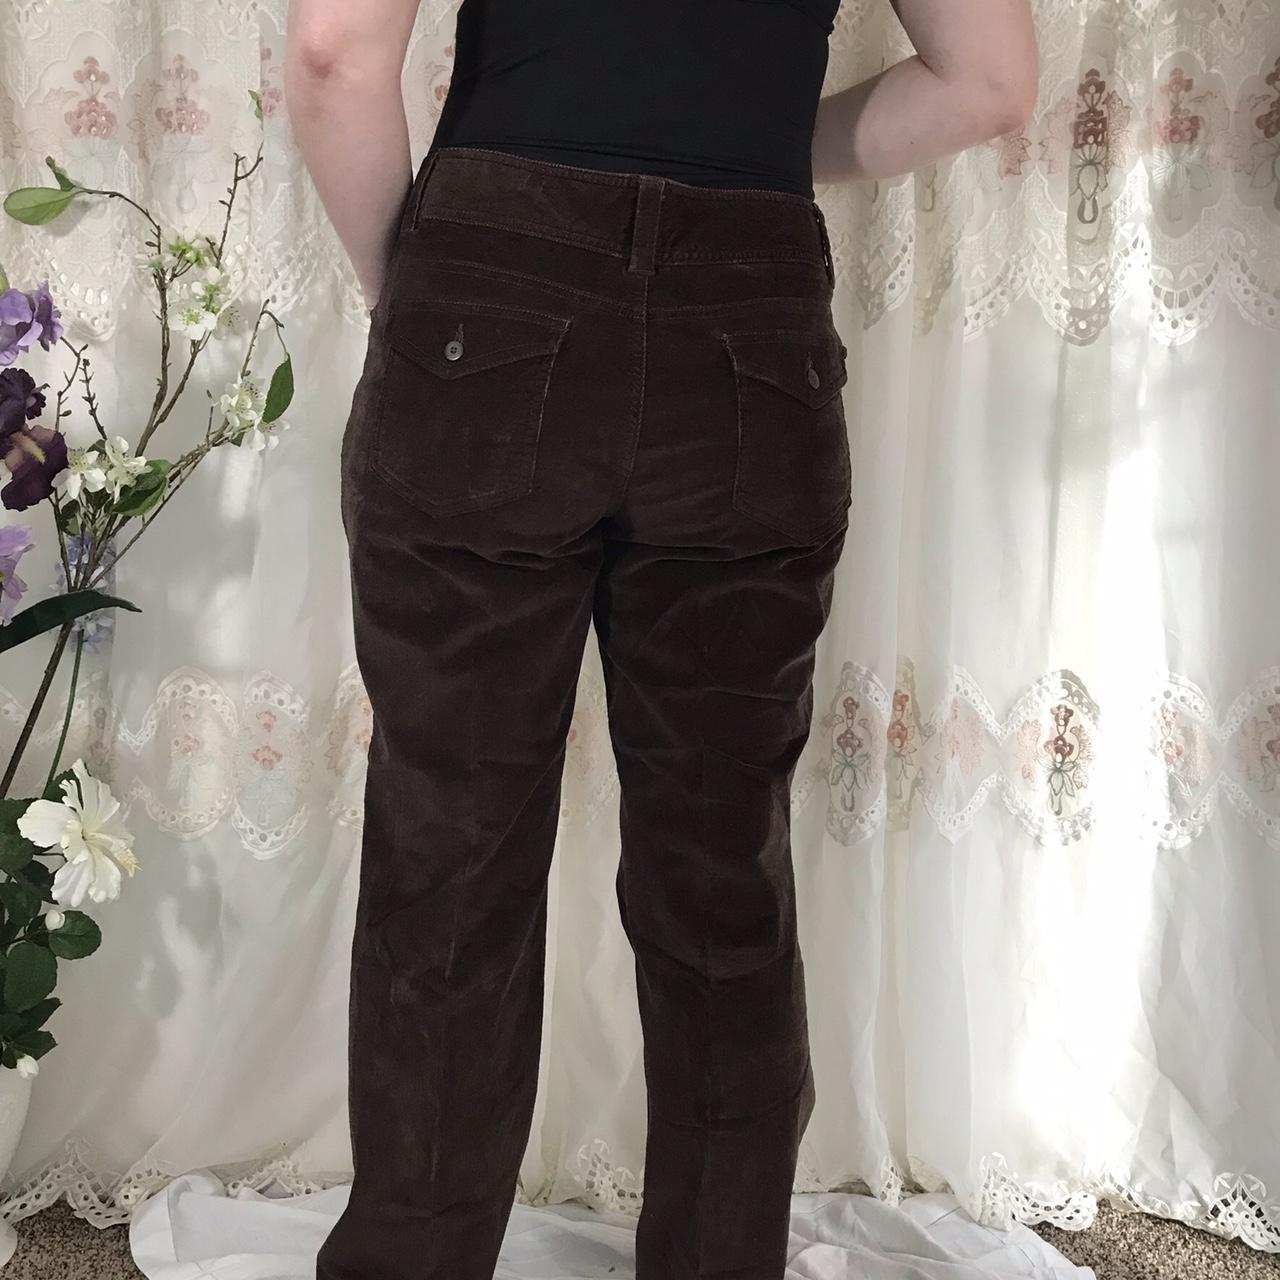 Product Image 3 - Rich brown wide leg corduroy